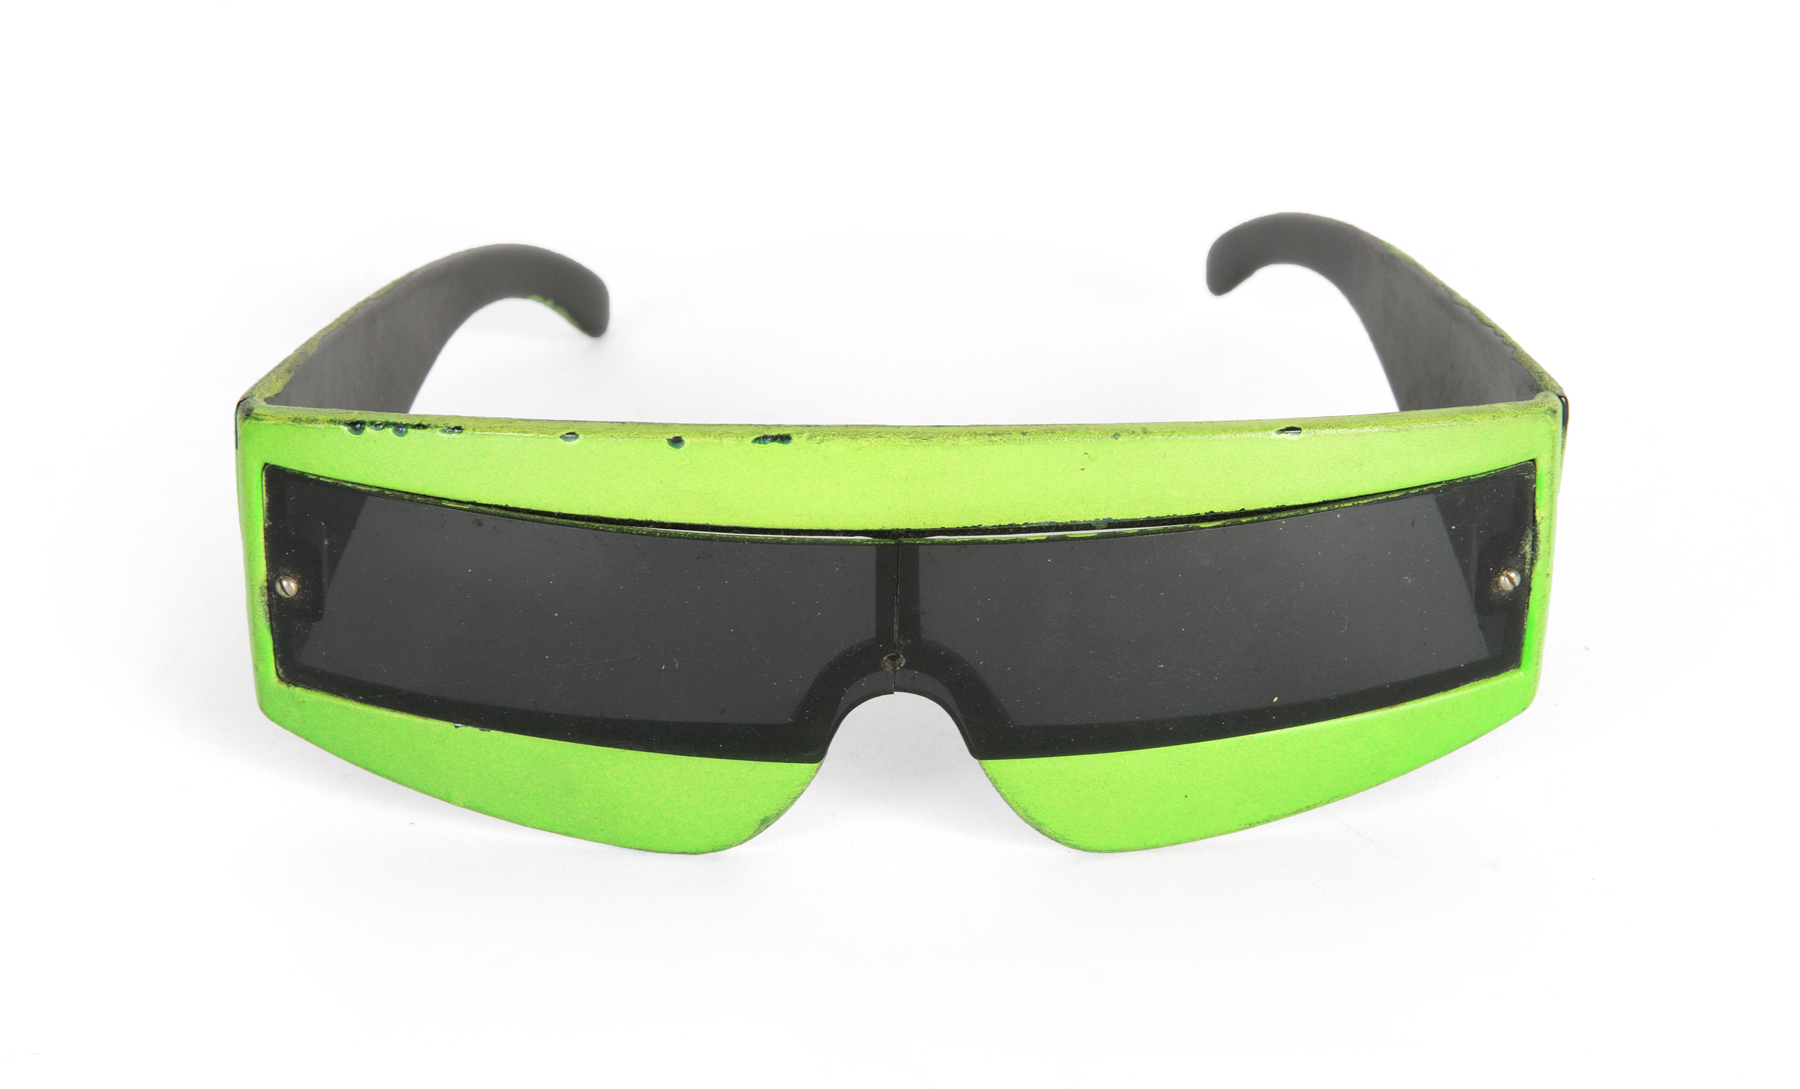 FREDDIE MERCURY "THE INVISIBLE MAN" VIDEO WORN SUNGLASSES  A pair of neon green and black wraparound